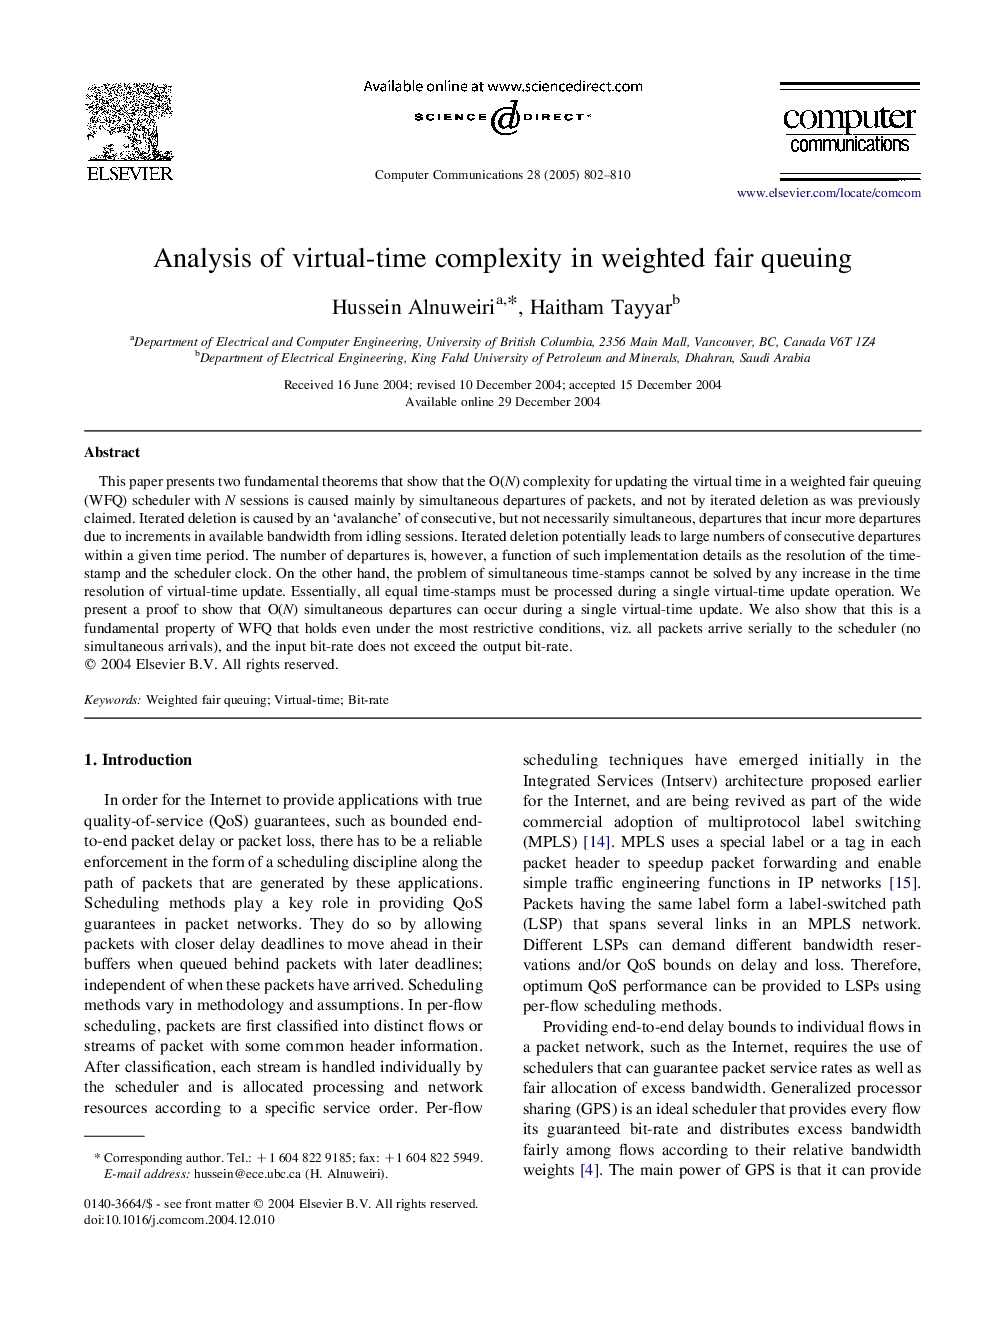 Analysis of virtual-time complexity in weighted fair queuing